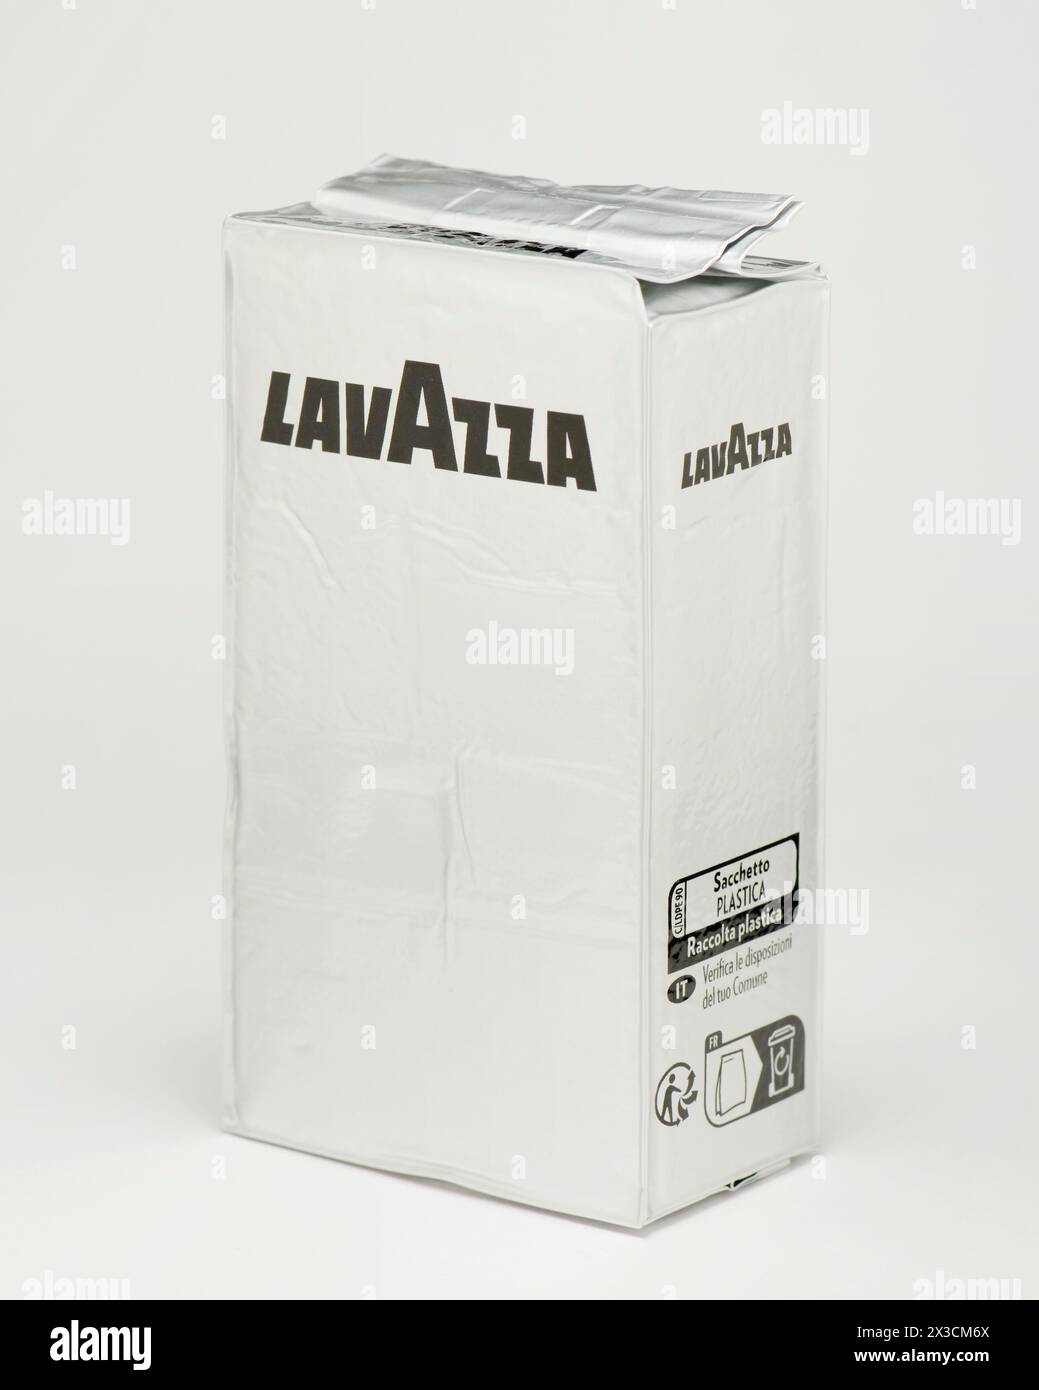 Lavazza Italian coffee single recyclable pack isolated on white as circular economy biodegradable packaging concept Stock Photo